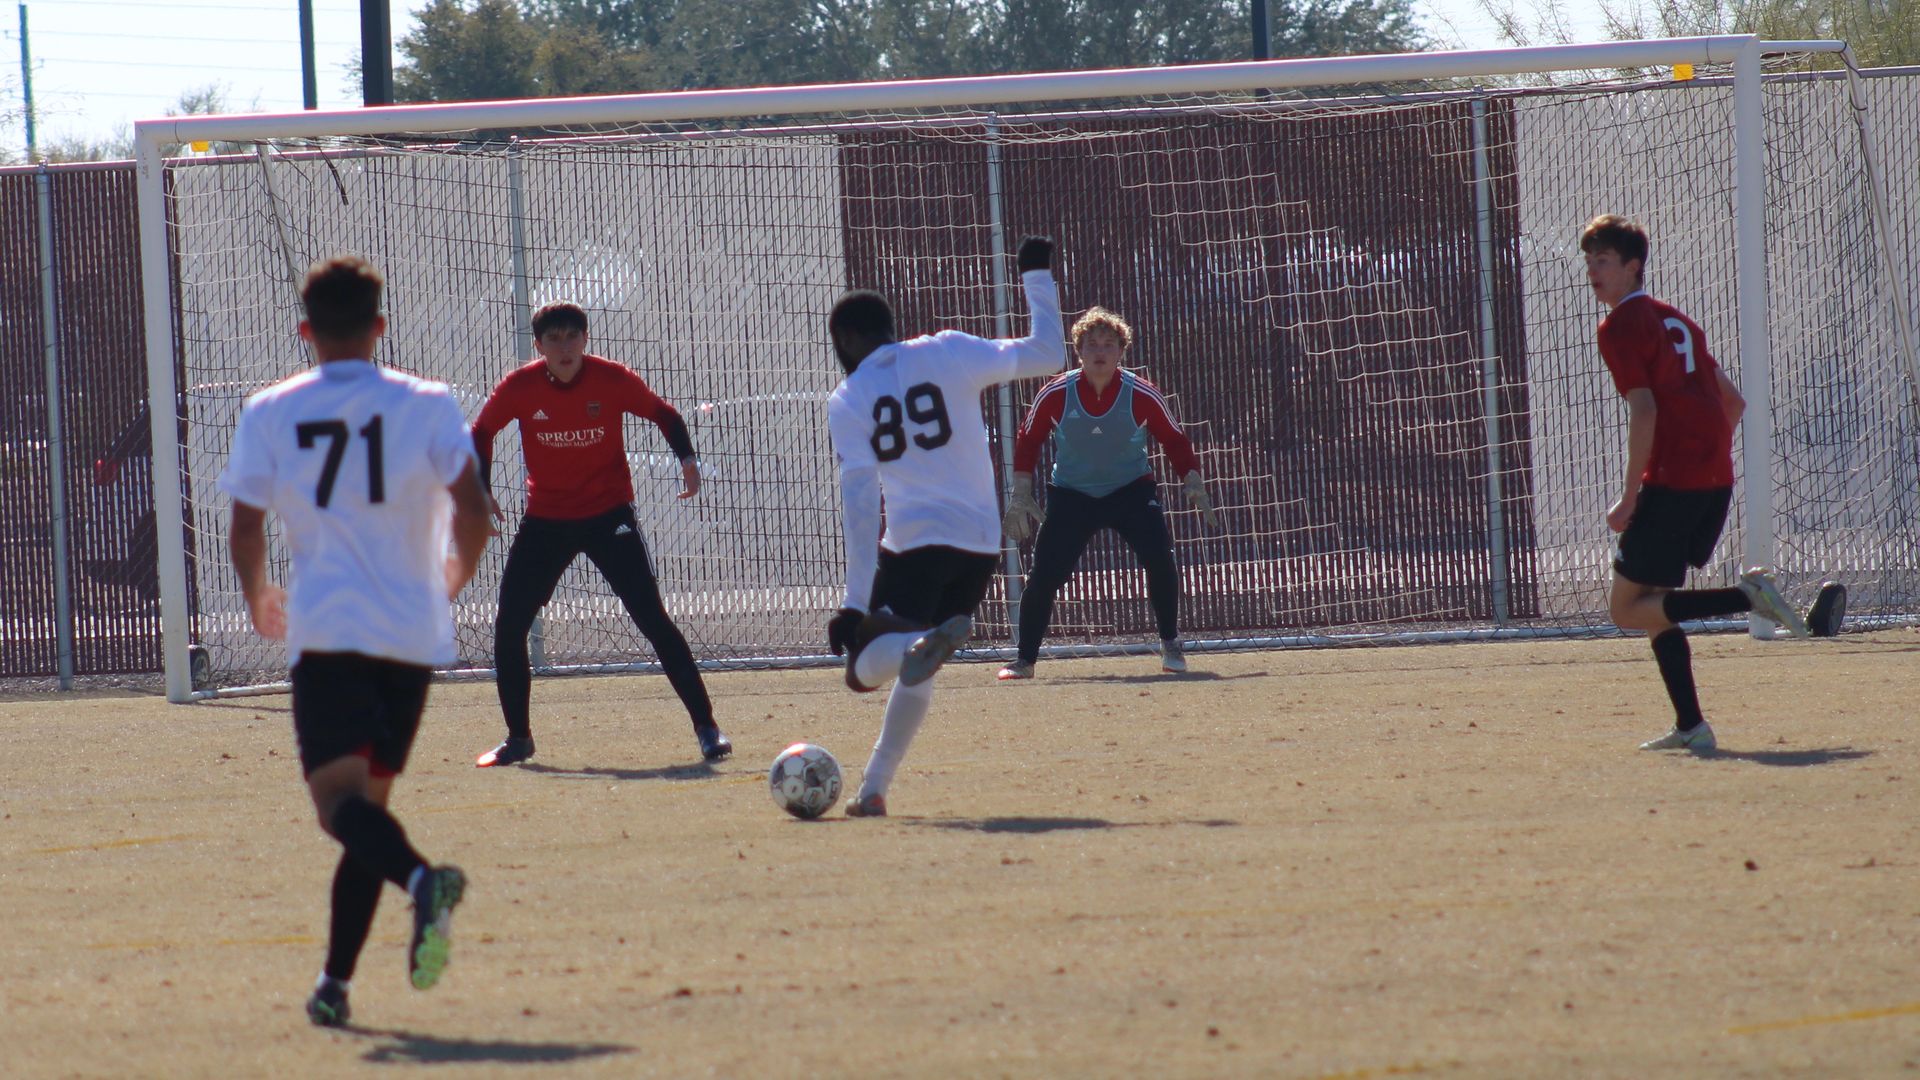 A soccer player prepares to shoot the ball at the goal. 